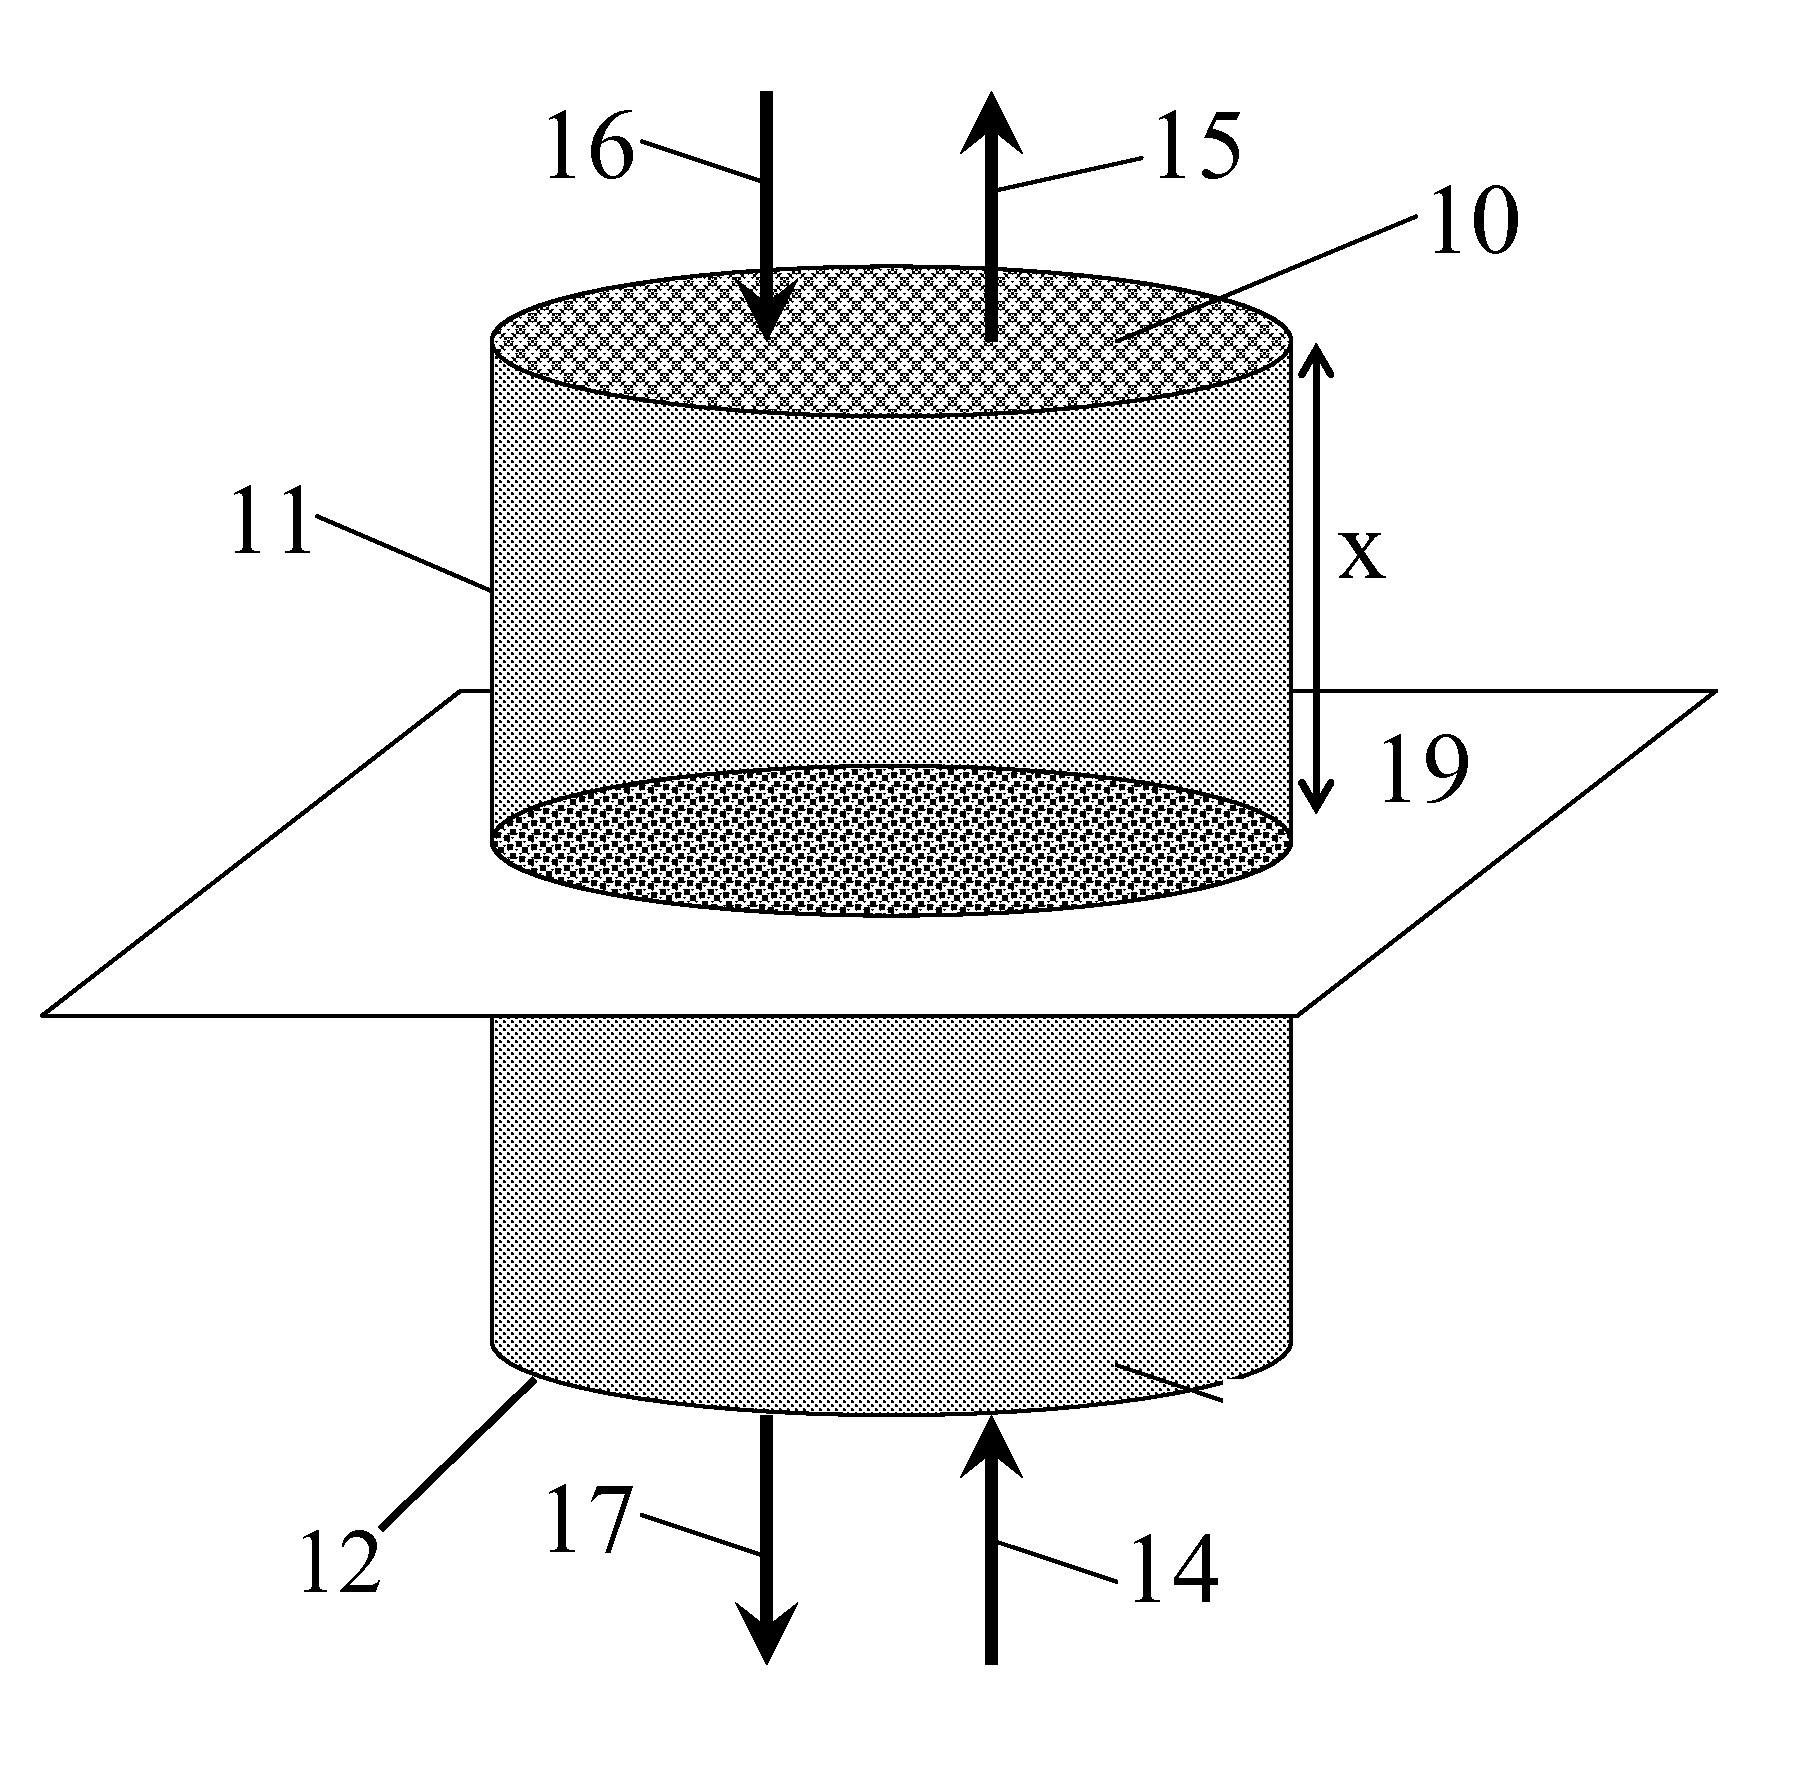 In-situ vaporizer and recuperator for alternating flow device